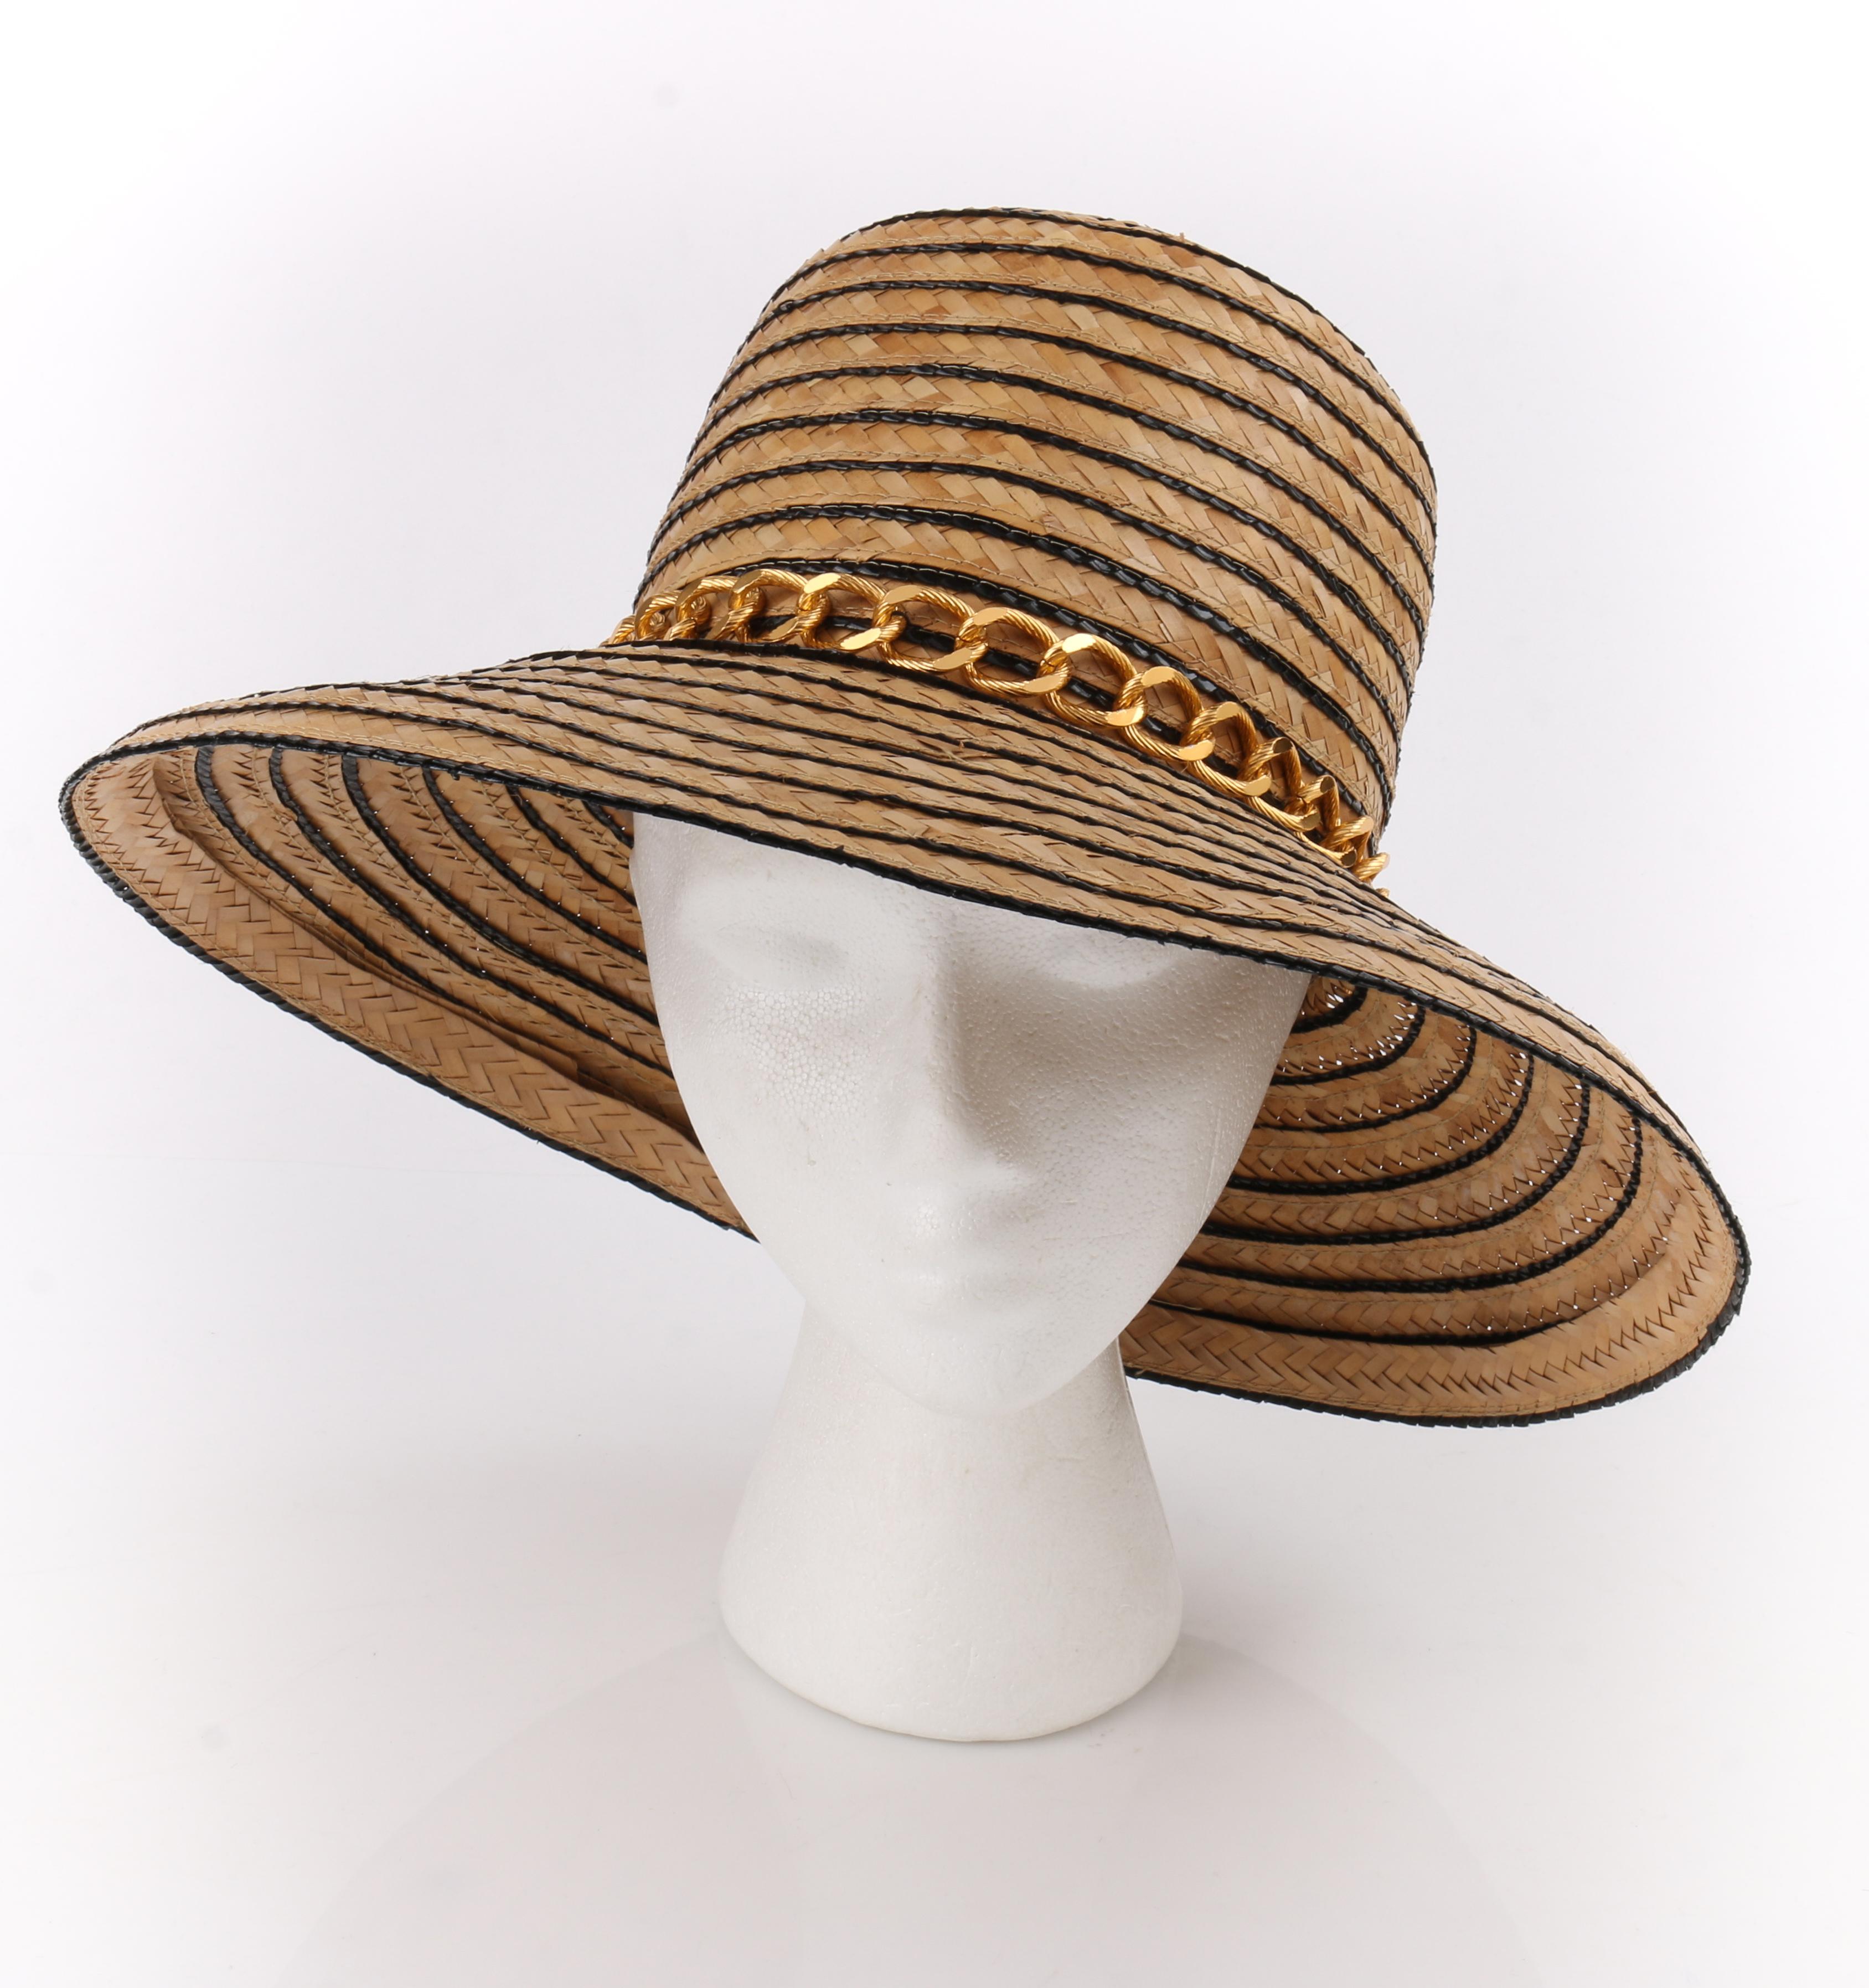 Miss Dior by CHRISTIAN DIOR c.1960’s Black Gold Woven Straw Bow Chain Sun Hat (New-Old Stock)
 
Circa: 1960’s
Label(s): Miss Dior created by Christian Dior / Saks Fifth Avenue
Style: Face framer / Sun hat 
Color(s): Shades of natural, black and gold